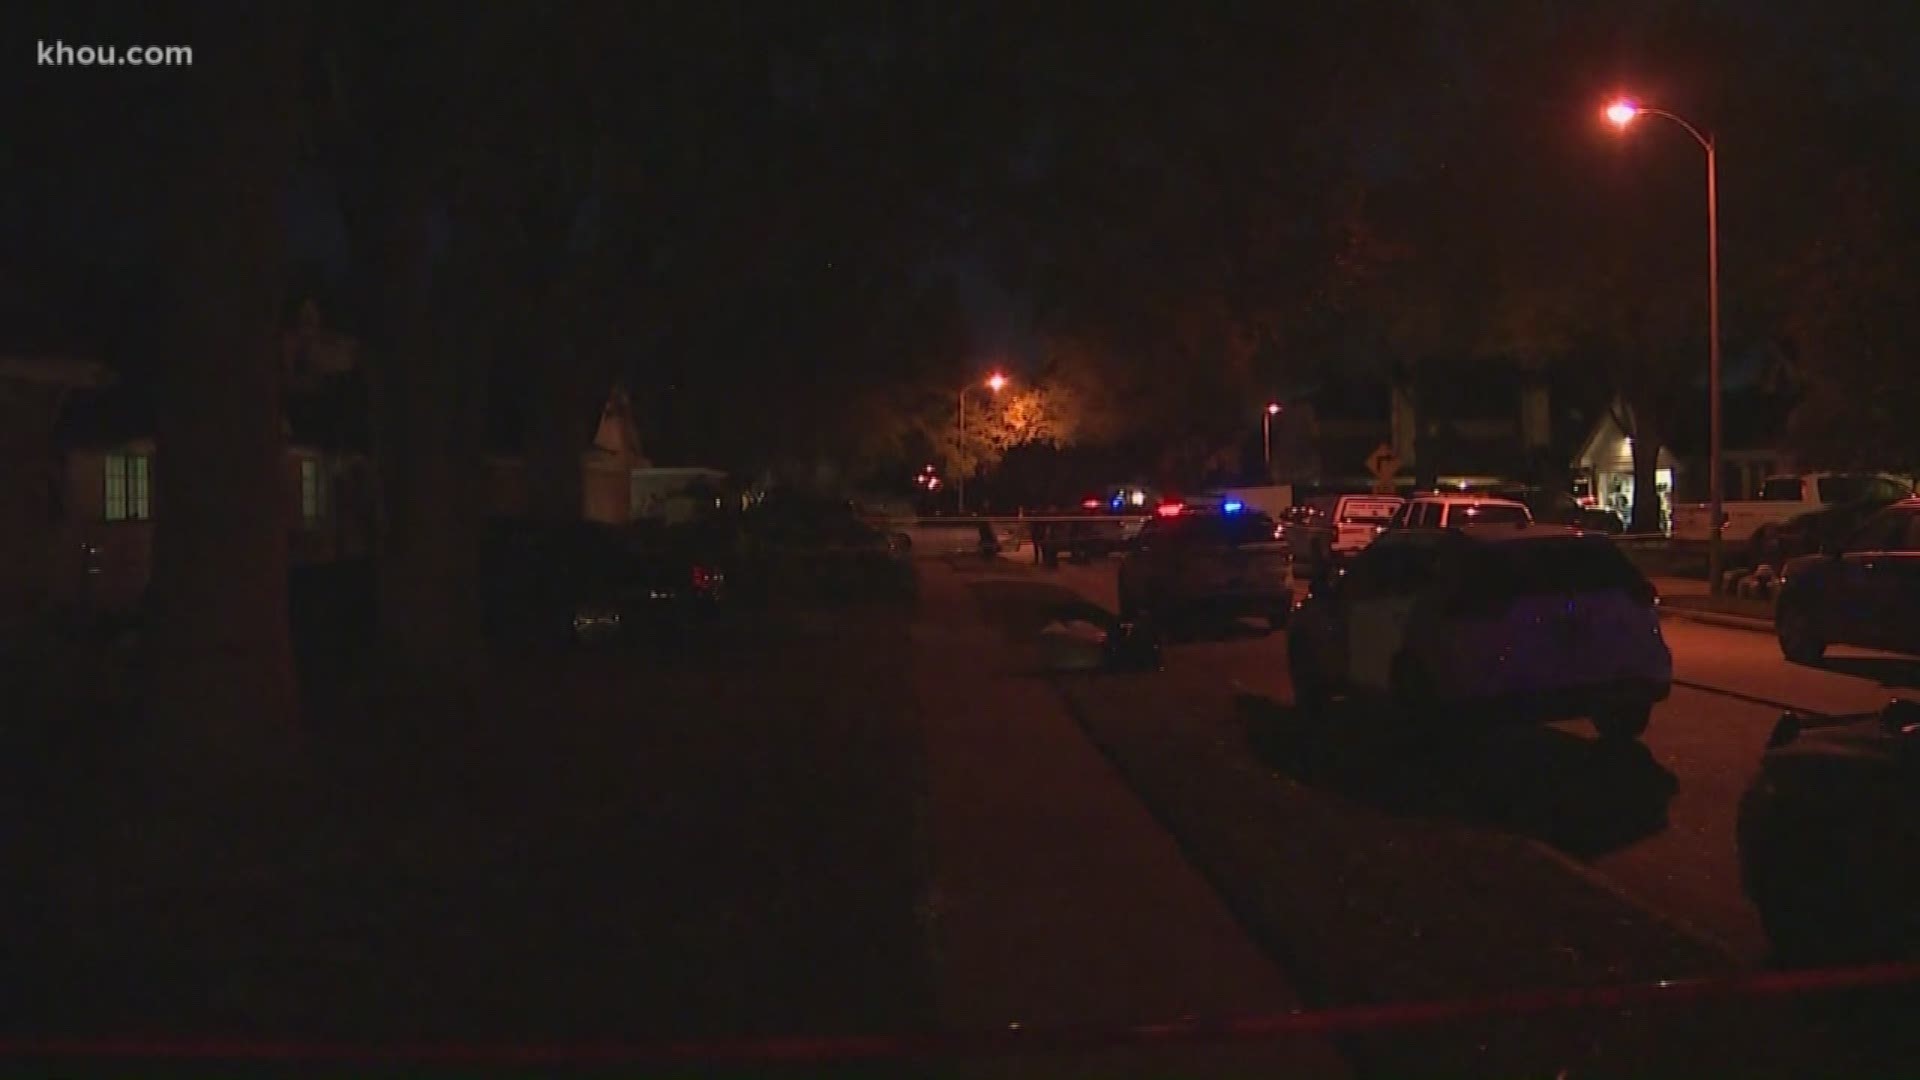 Harris County Sheriff's deputies are investigating after a man was found shot to death in his home in Katy Friday evening.